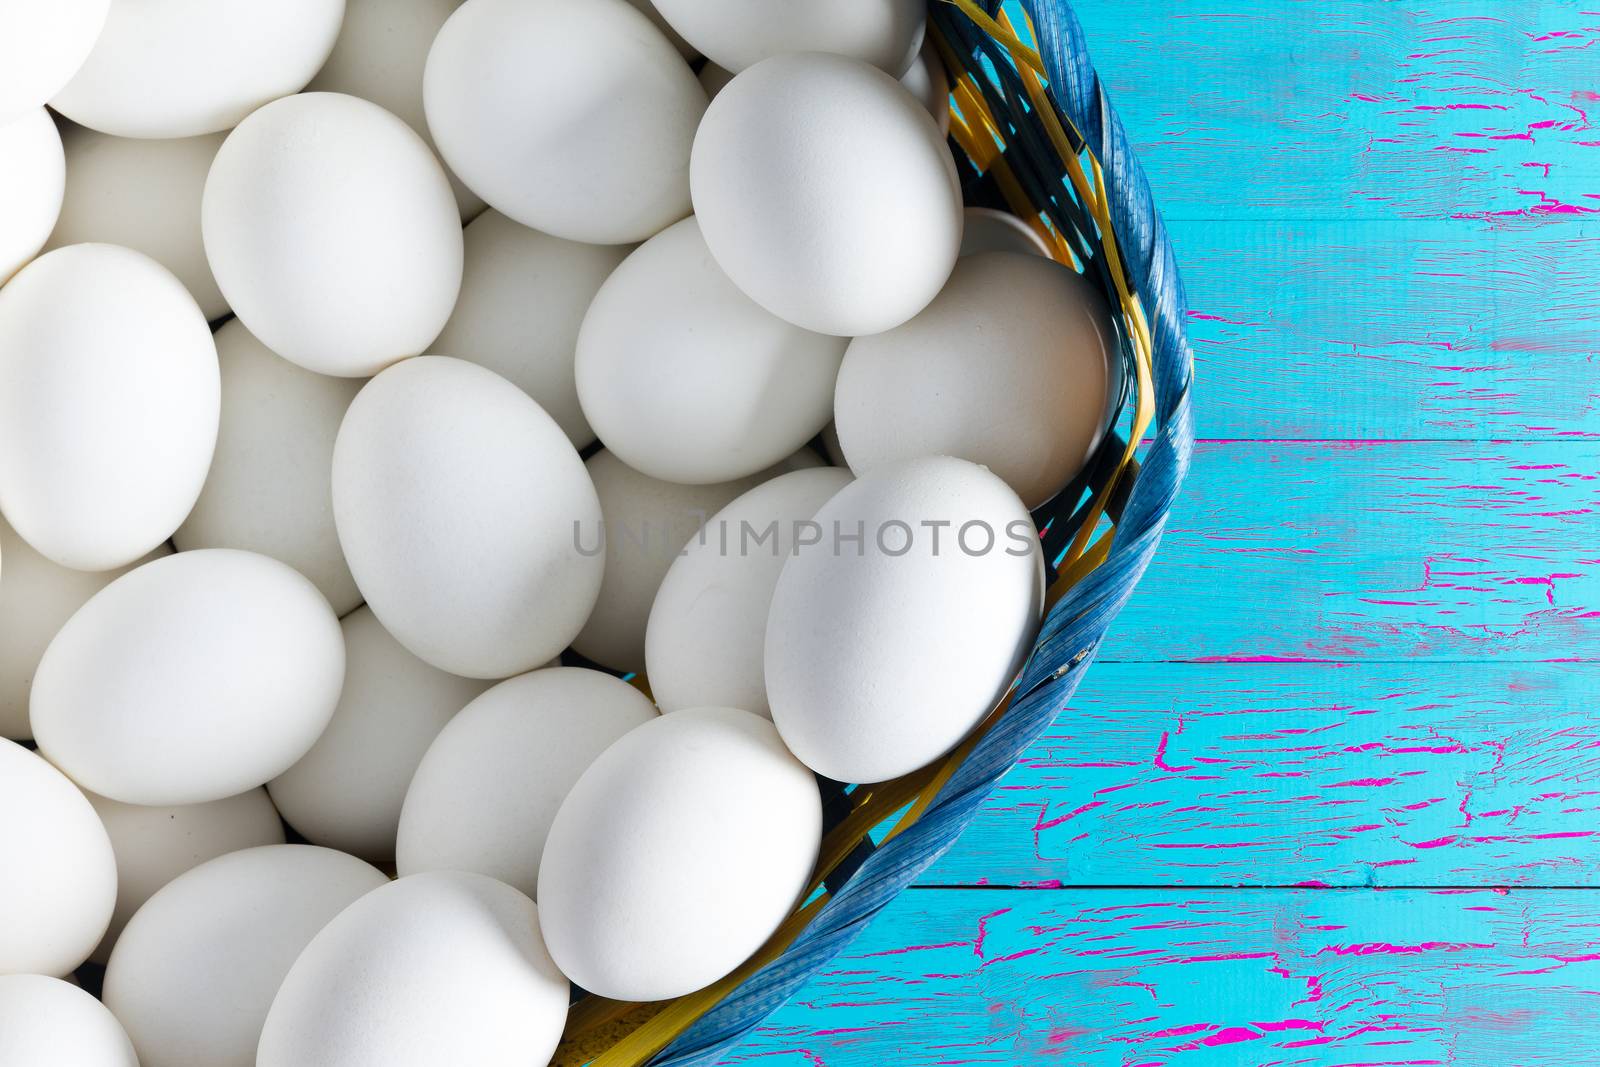 Wicker basket full of farm fresh clean white hens eggs on a wooden table painted with exotic blue crackle paint with copy space